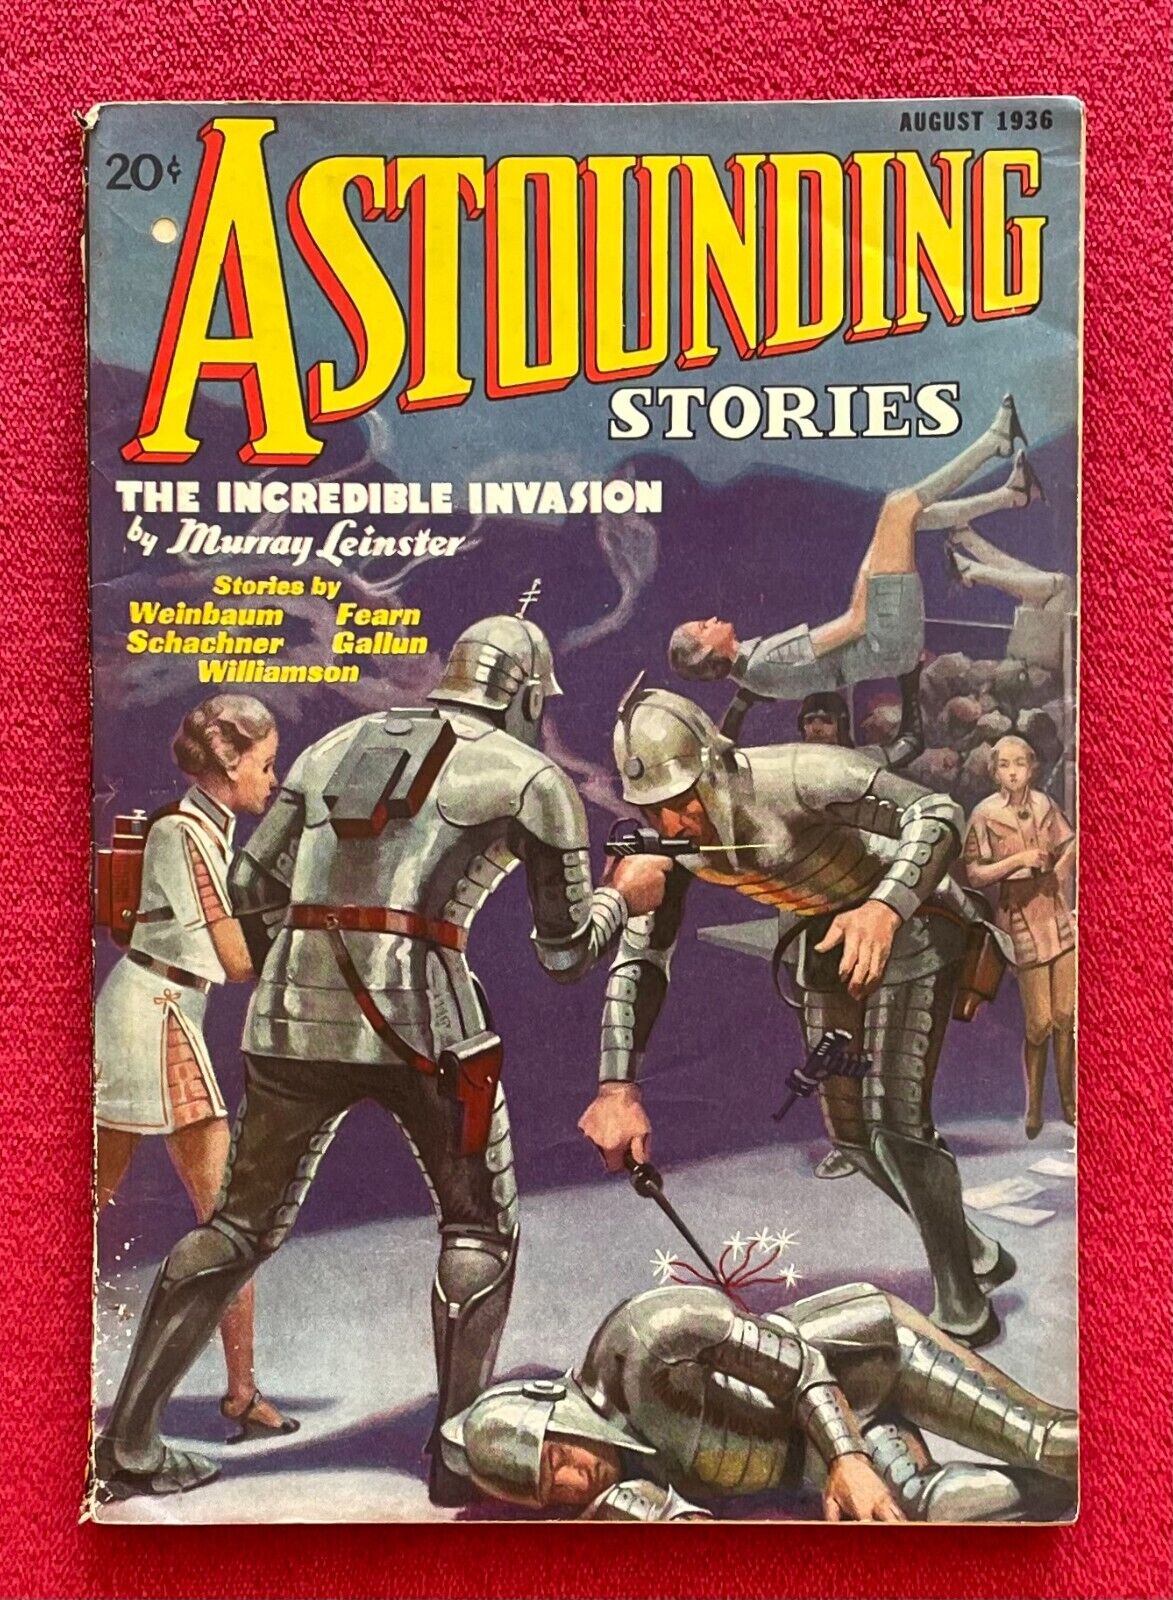 ASTOUNDING STORIES AUG. 1936-THE INCREDIBLE INVASION & OTHER ILLUSTRATED STORIES